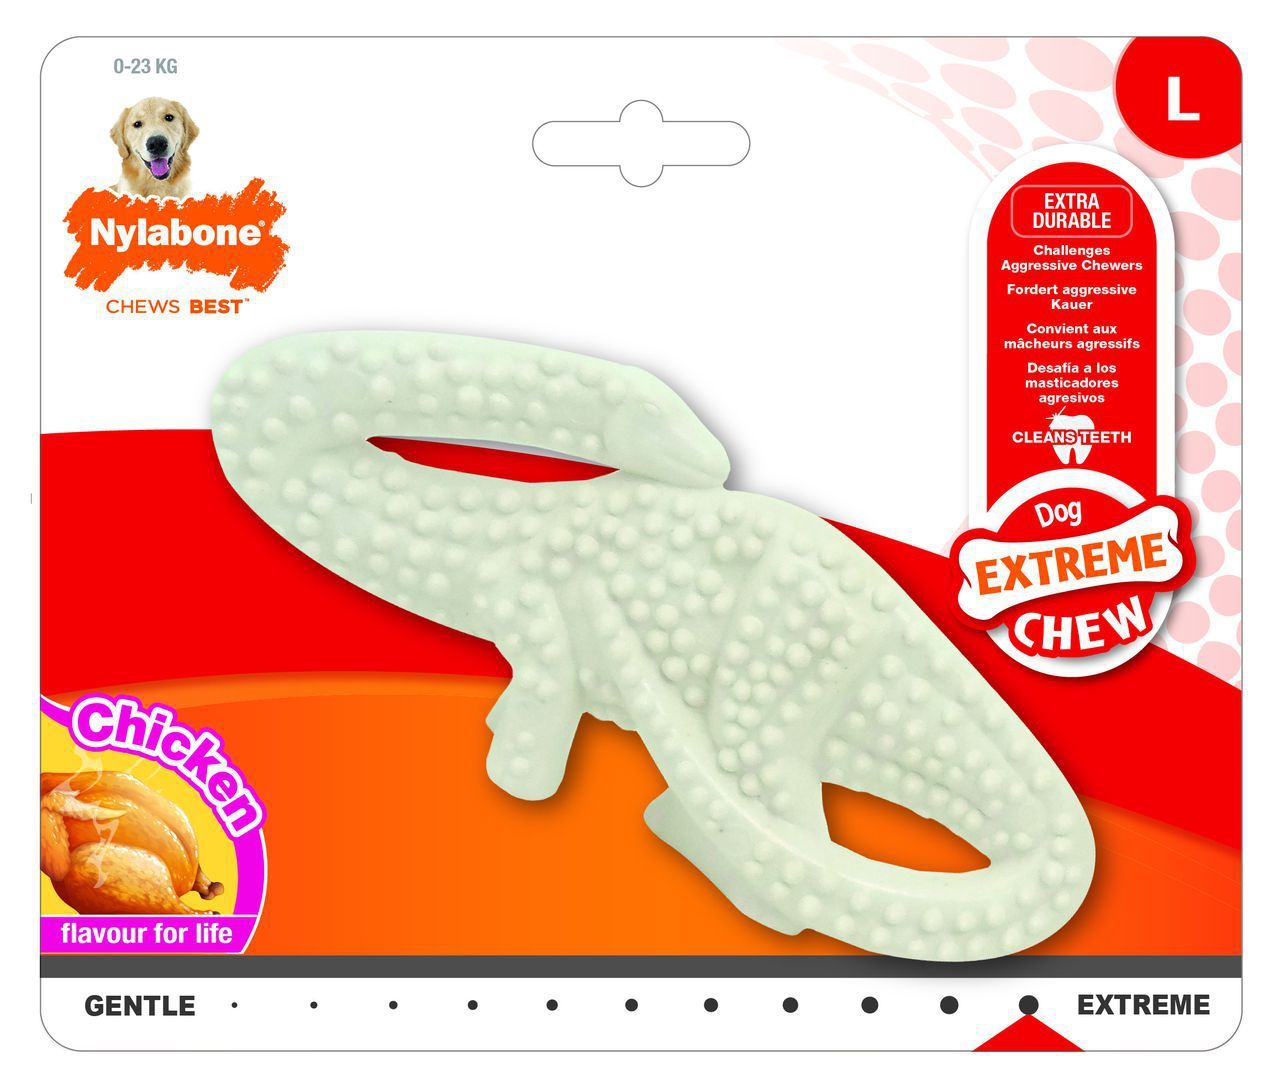 Nylabone Dental Dinosaur Chew Toy - Must have for teething puppies!